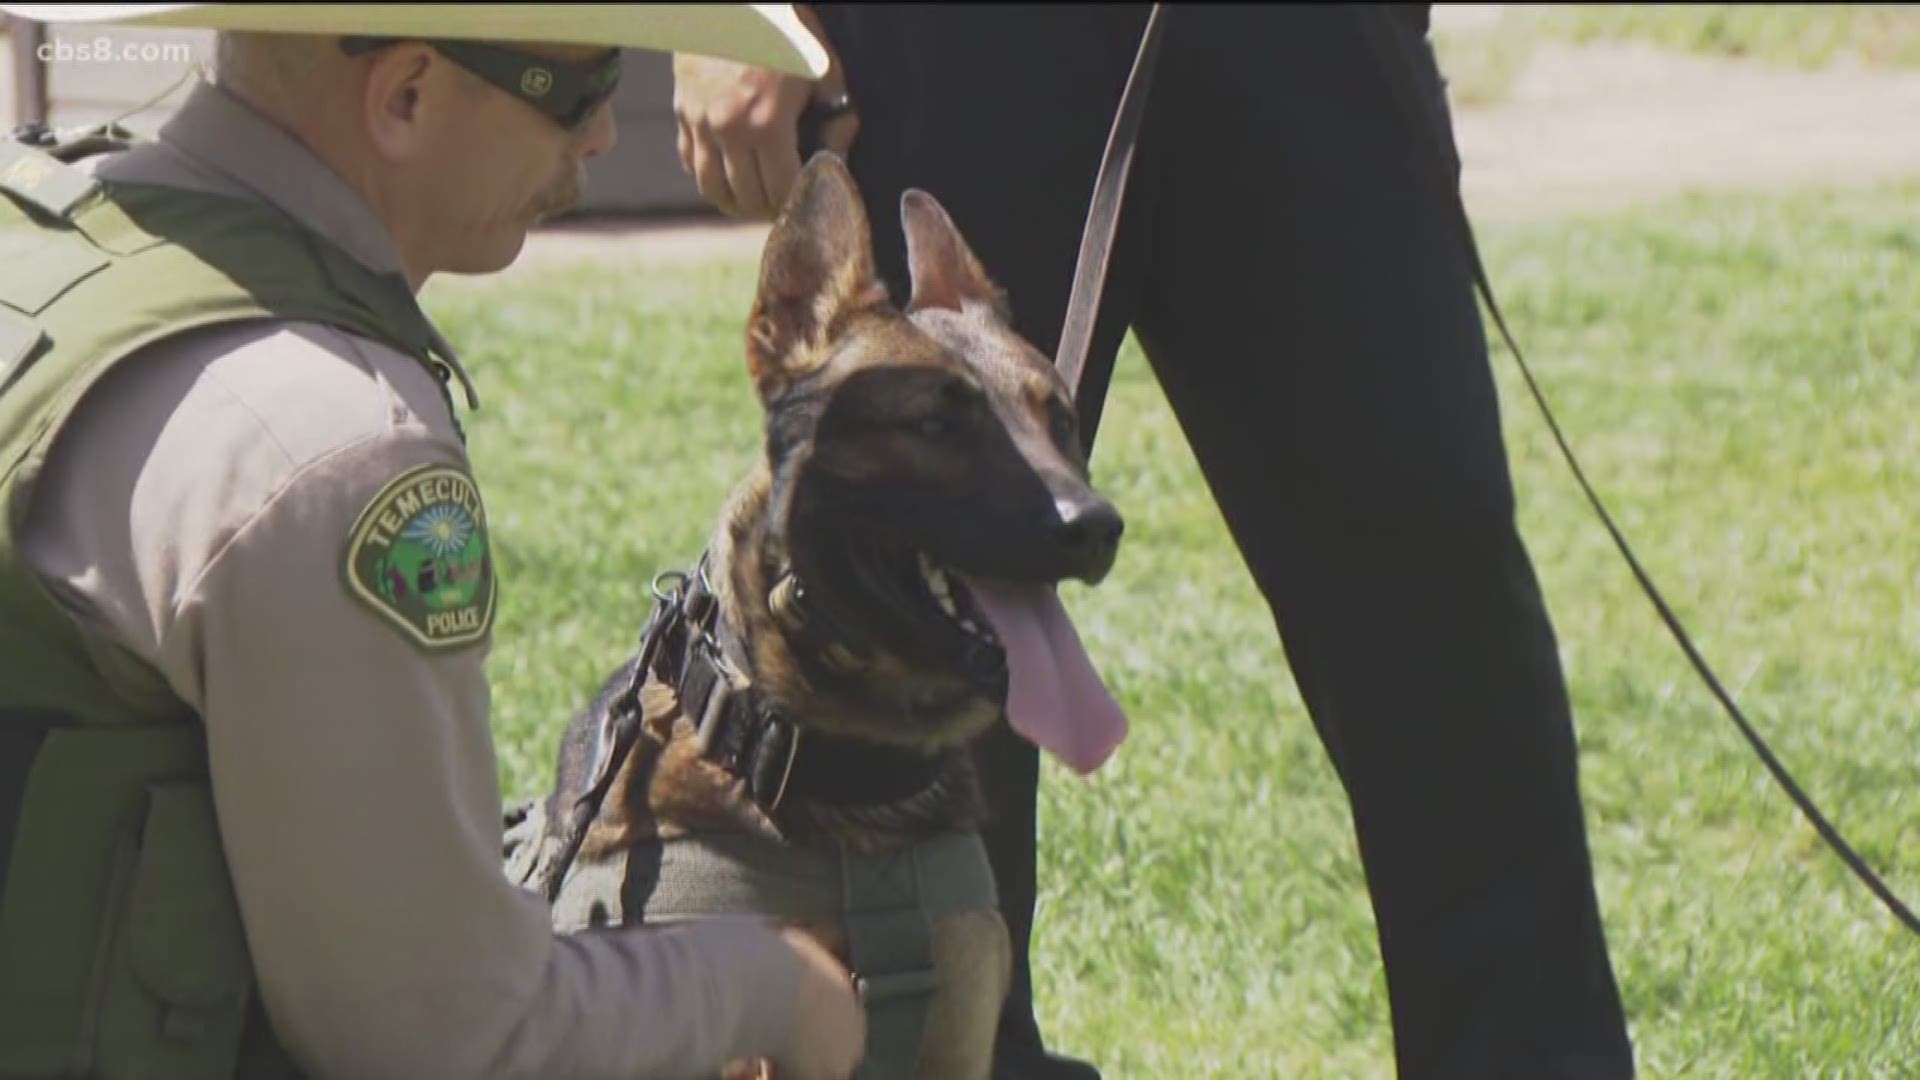 The amount of time it takes to train a K9 to avoid a snake varies, but experts recommend a refresher course for K9s at least once a year.